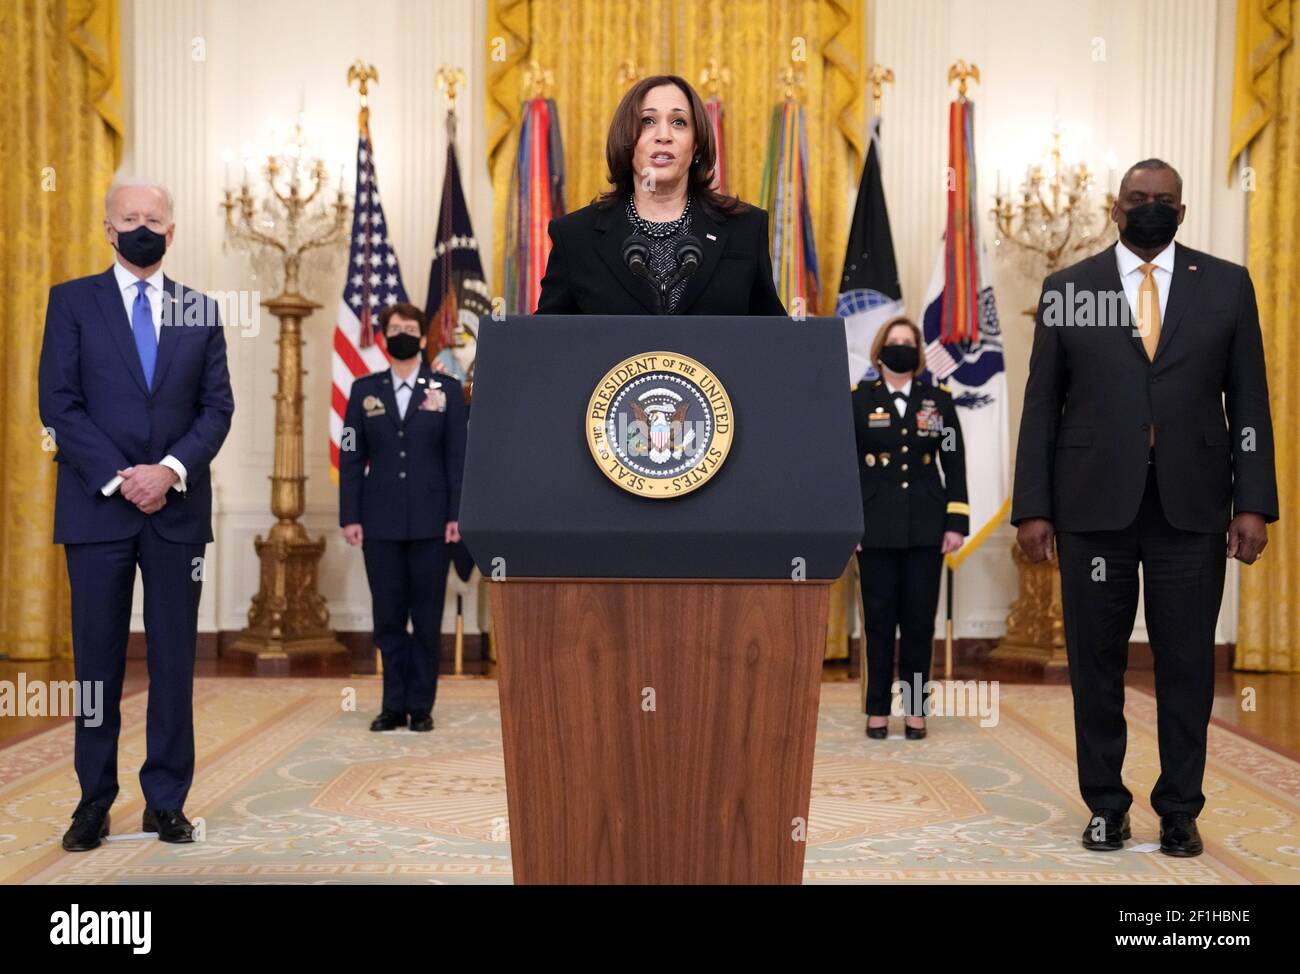 United States Vice President Kamala Harris delivers remarks at President Joe Biden's Combatant Commander nomination event for, Air Force Gen. Jacqueline Van Ovost and Army Lt. Gen. Laura Richardson in the East Room at the White House in Washington, DC on Monday, March 8, 2021. Ovost, has been nominated to lead the Transportation Command and Richardson, has been nominated to lead military activities in Latin America at Southern Command. Defense Secretary Lloyd Austin also attended. Credit: Kevin Dietsch/Pool via CNP /MediaPunch Stock Photo